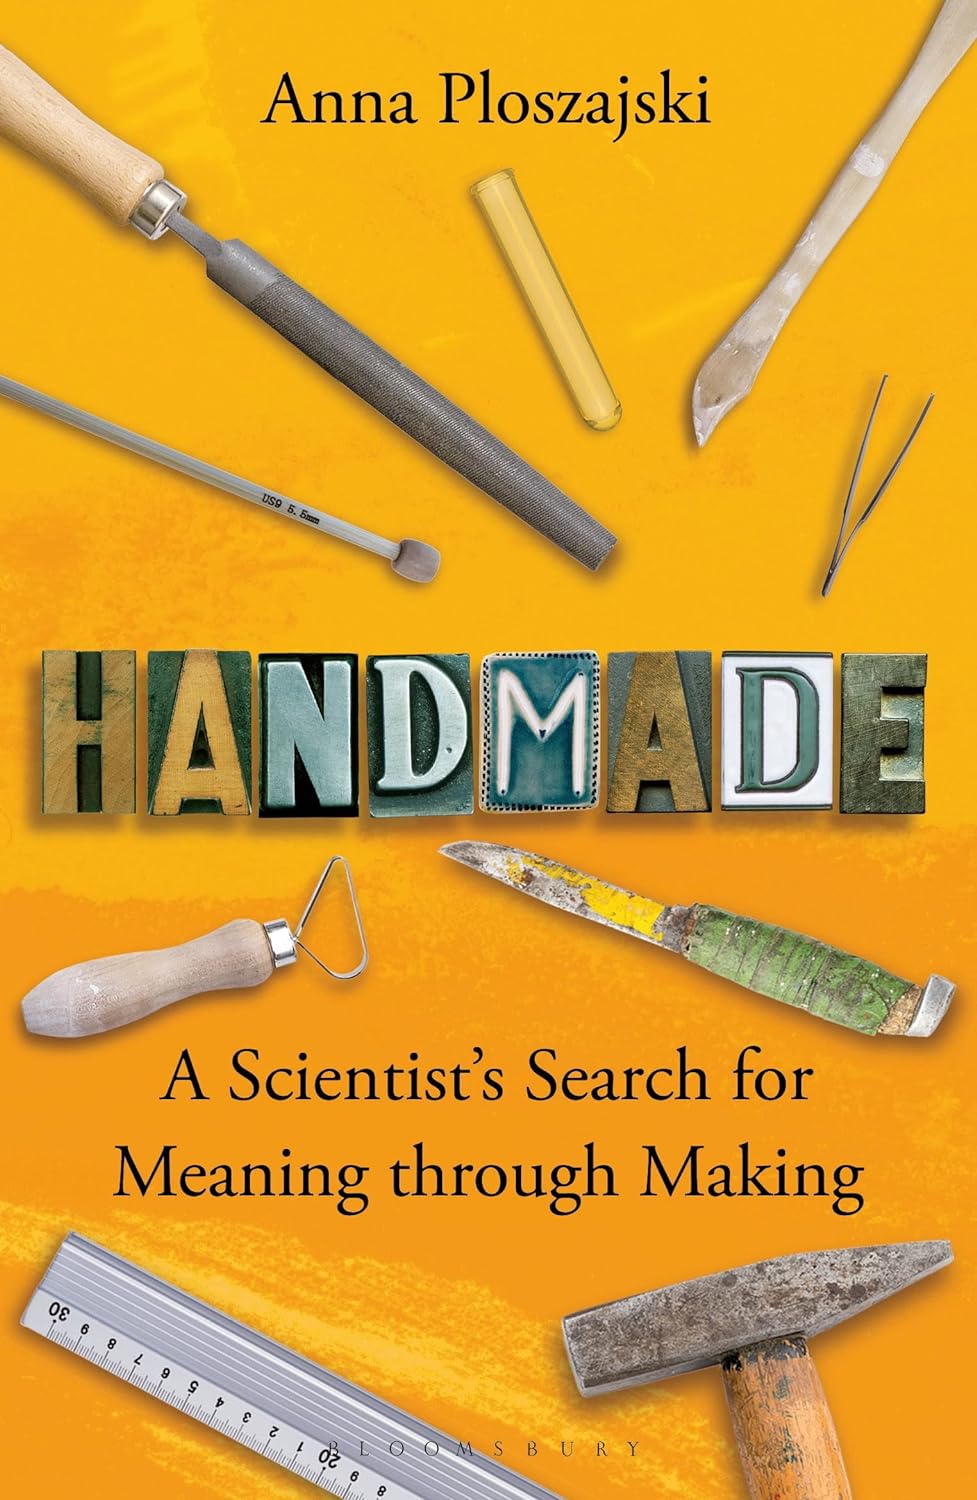 Handmade: A Scientist’s Search for Meaning Through Making